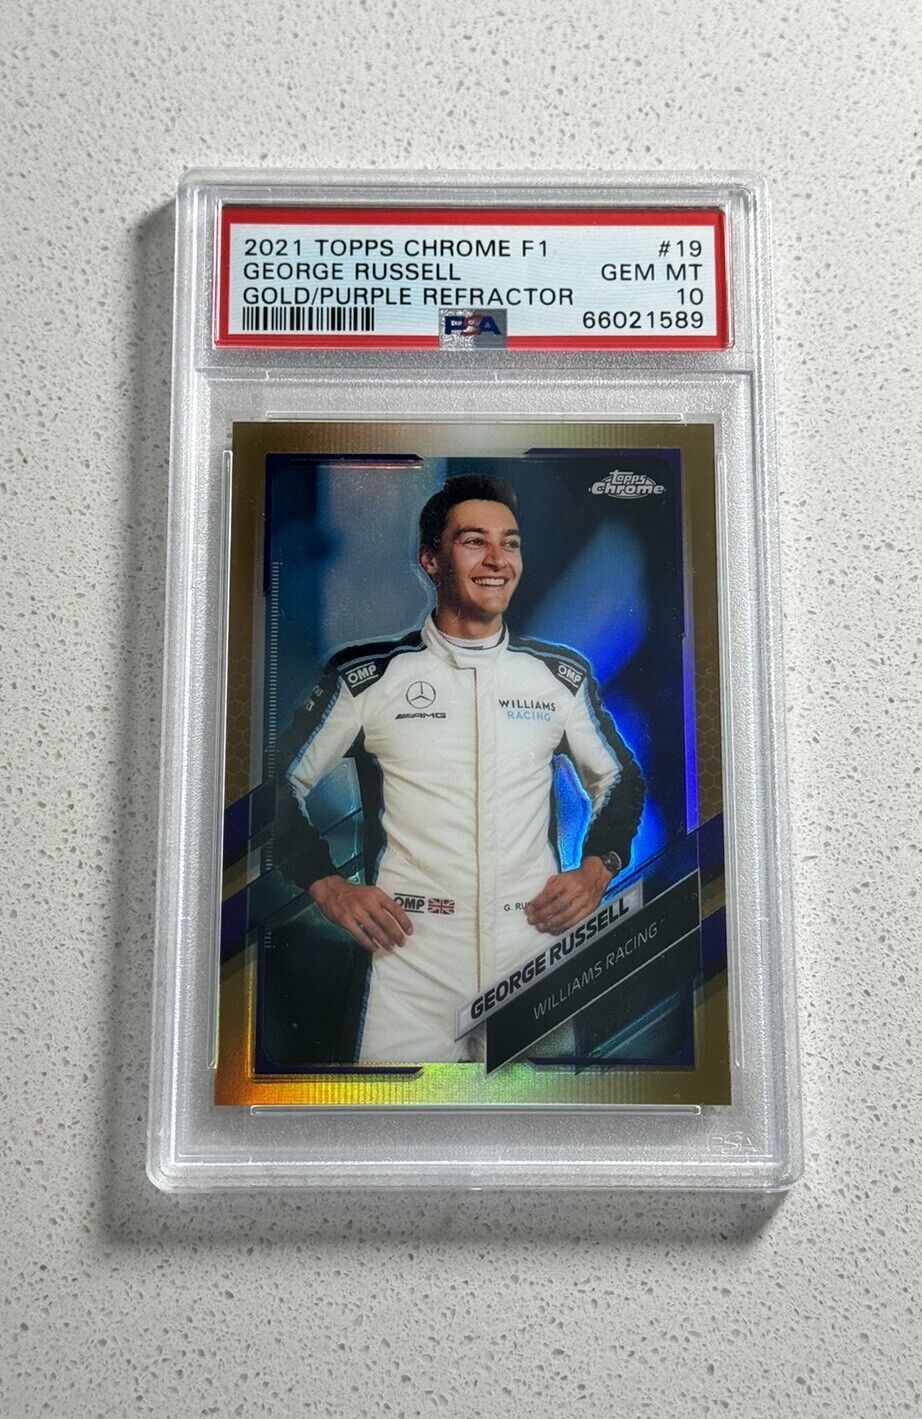 2021 Topps Chrome F1 #19 George Russell GOLD/PURPLE REFRACTOR PSA 10 GEM MINT